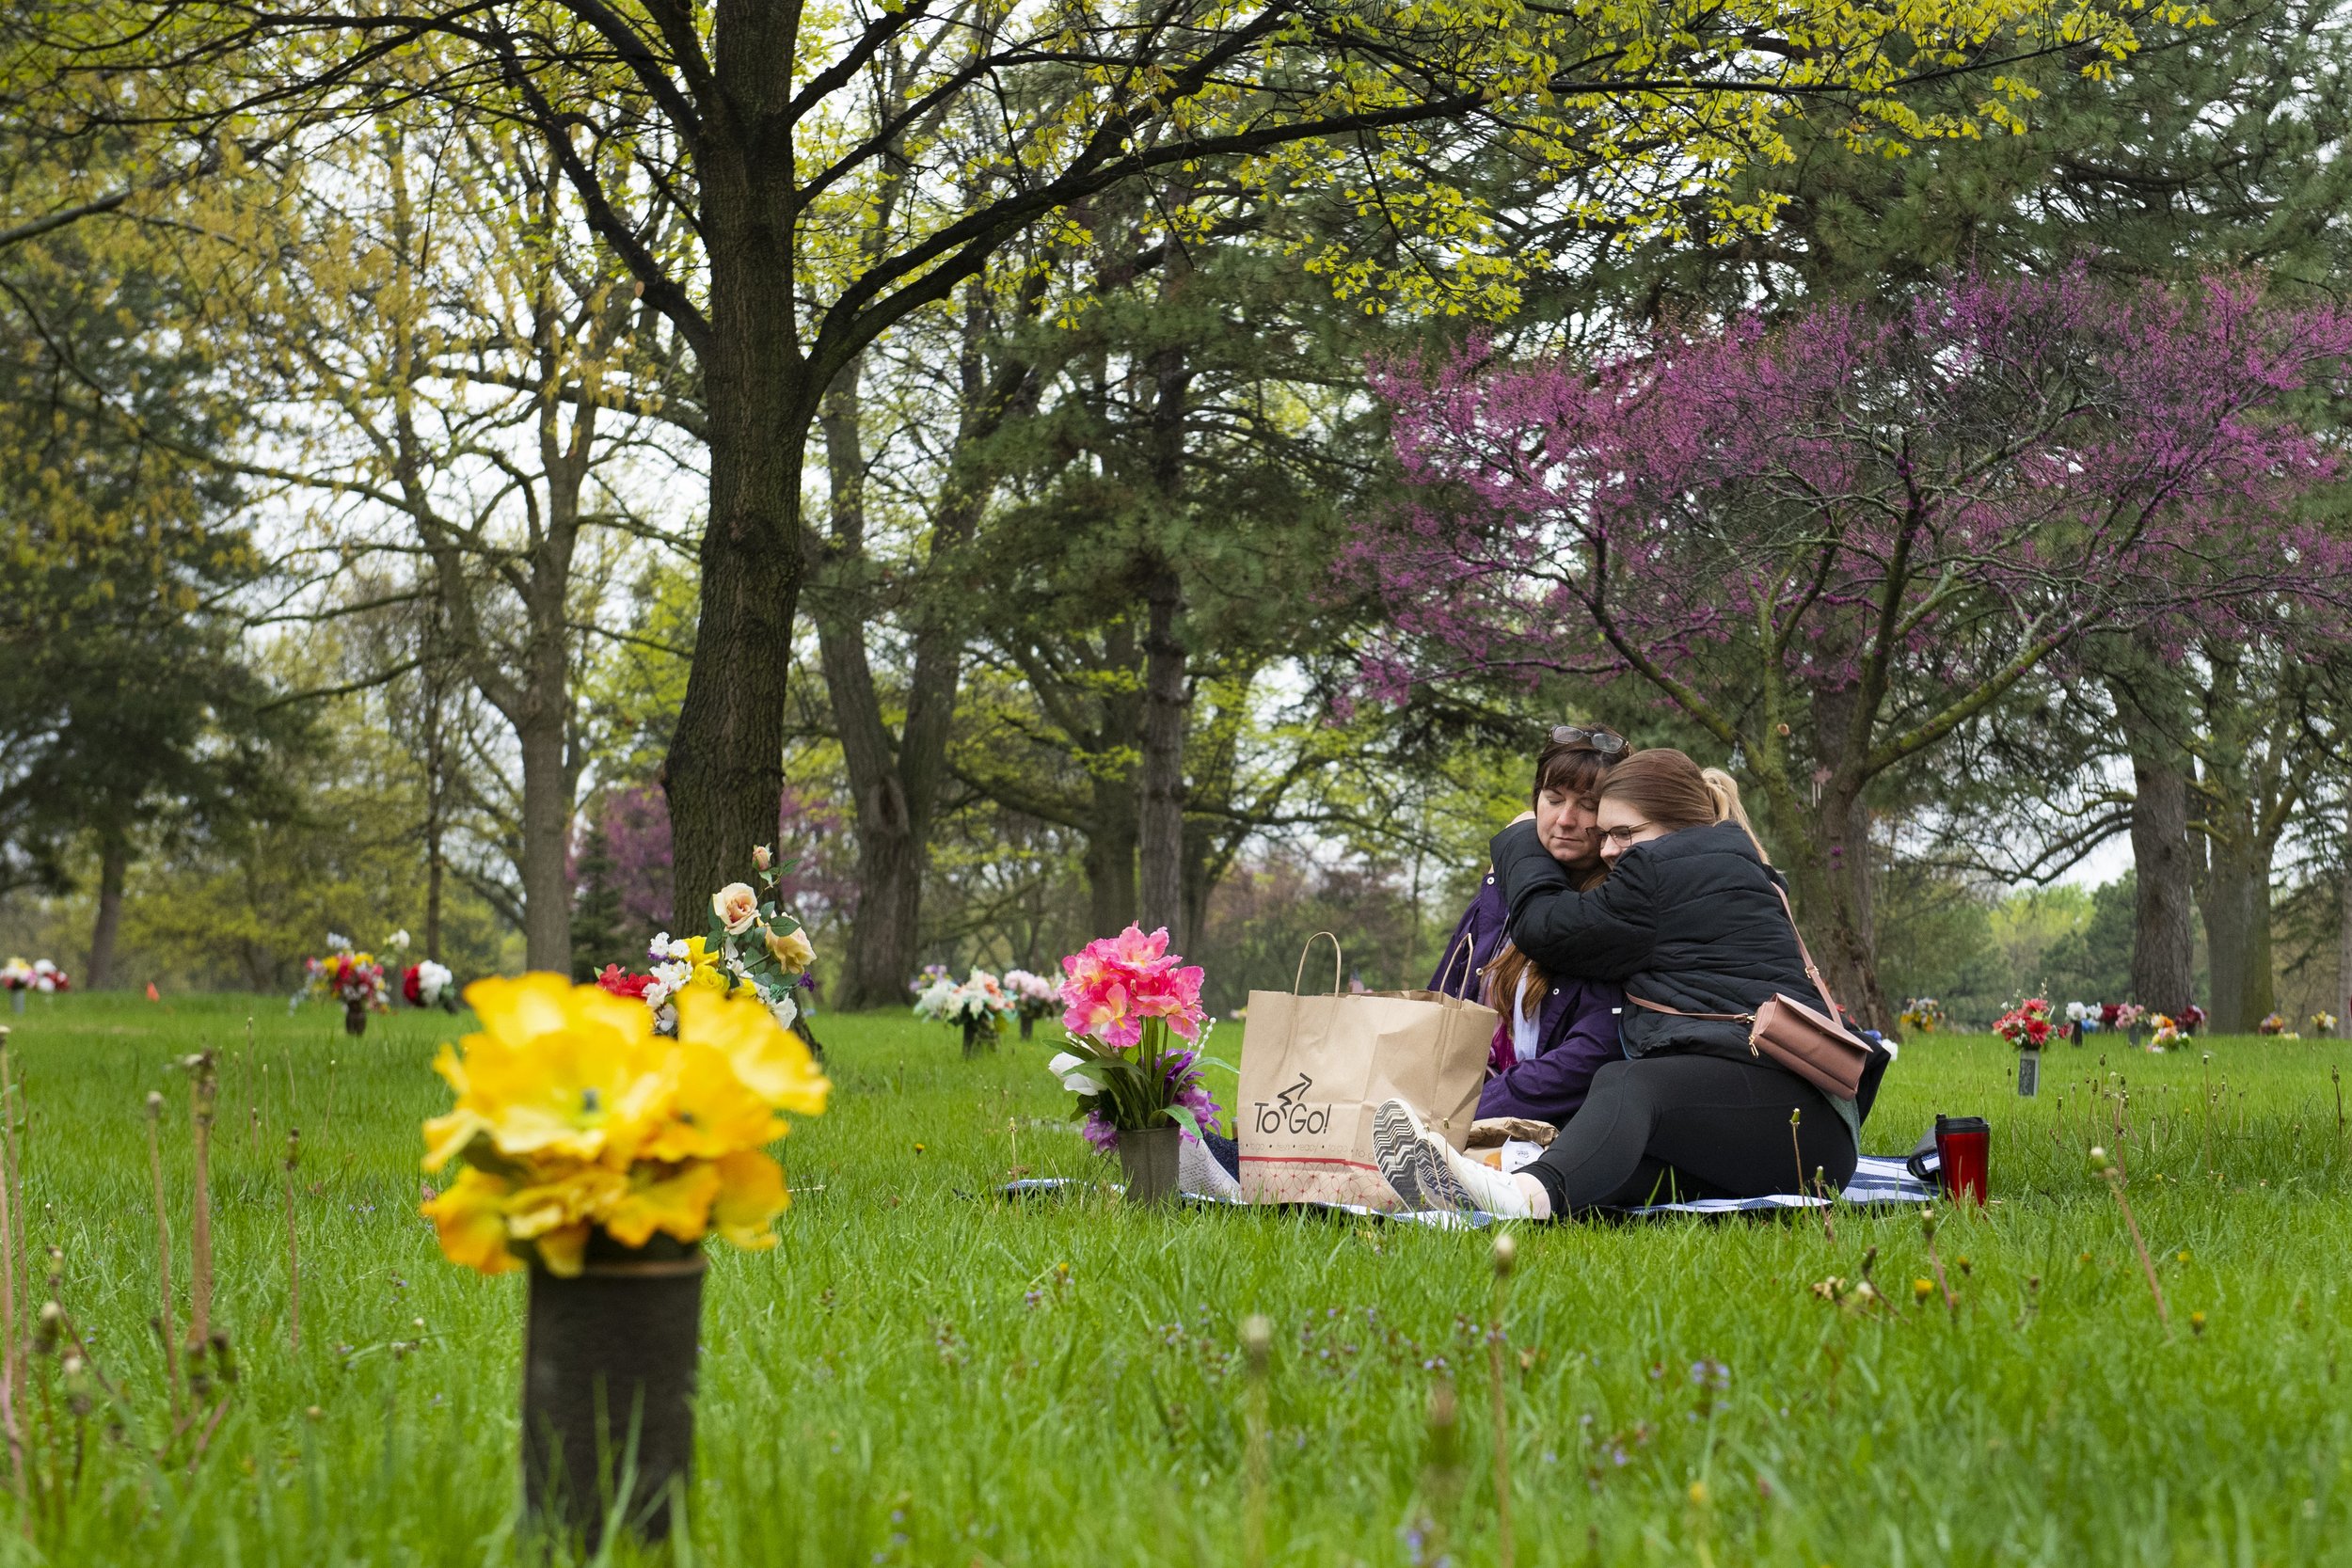  Christine Scott (left) hugs her daughter Keisha Scott as they have a picnic of Burger King breakfast sandwiches at the grave of Christine's mother and father, Susan and Ted Hegwald, at Wyuka Cemetery on Mother's Day, May 8, 2022, in Lincoln, Nebrask